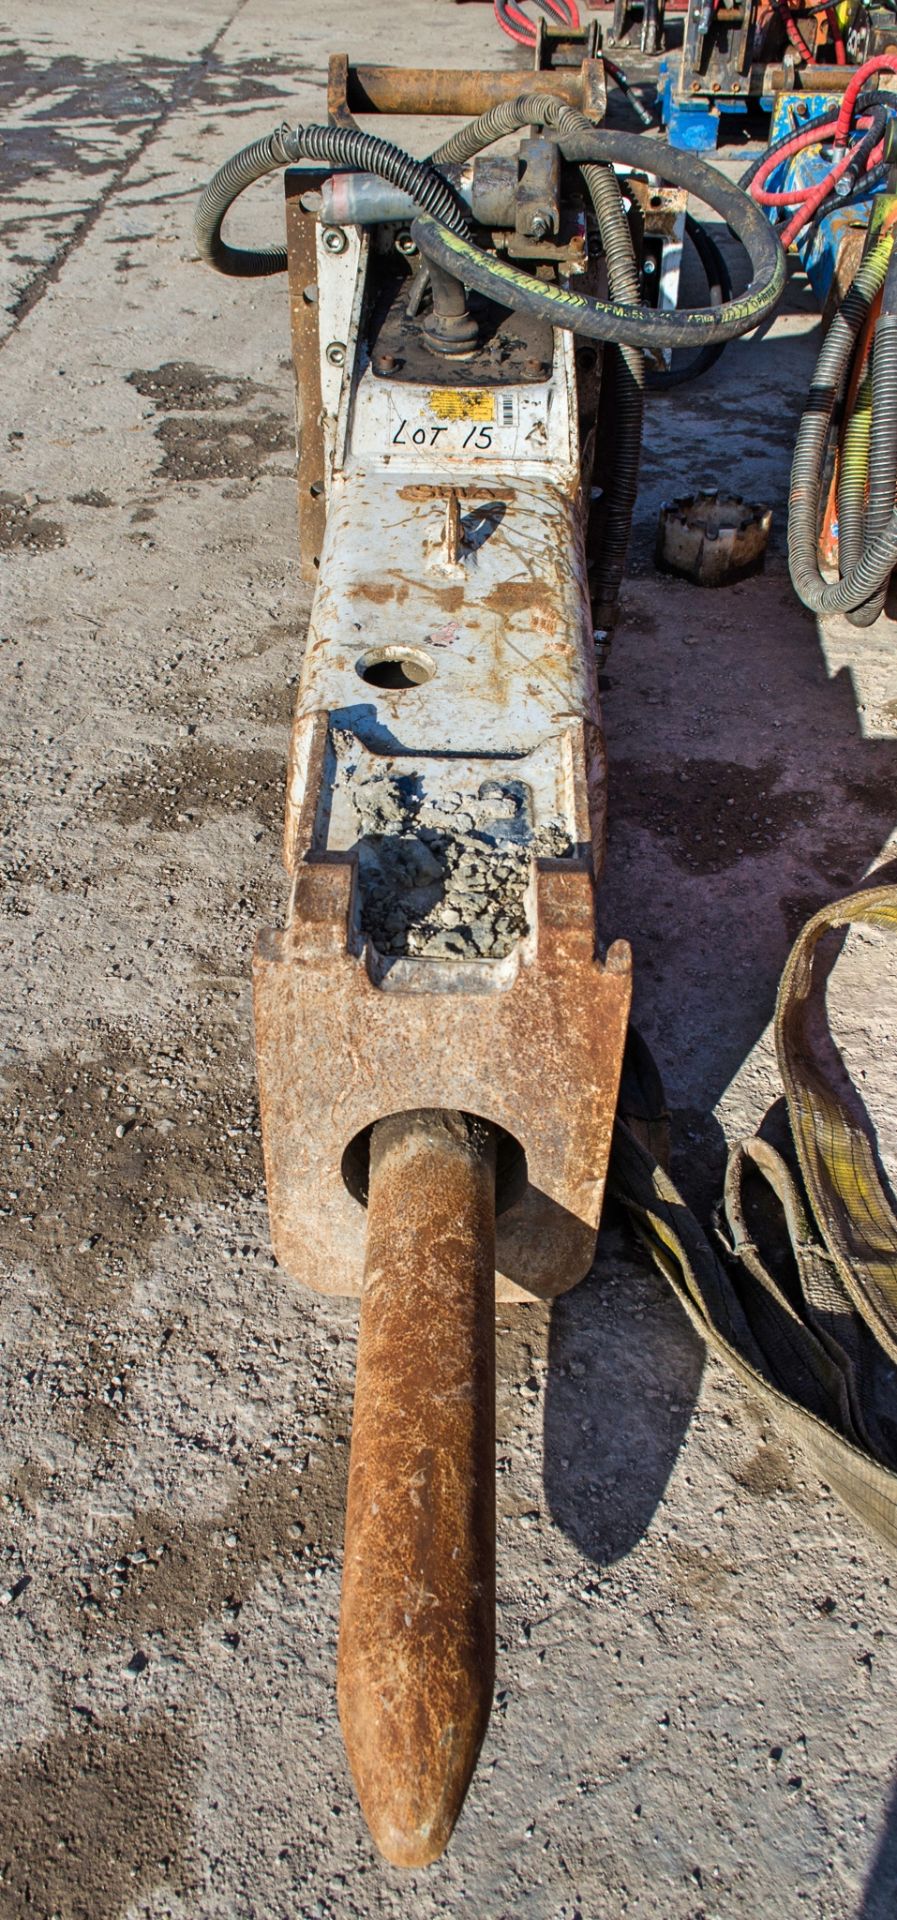 Construction Tools RX14L hydraulic breaker to suit 13-18 tonne excavator c/w Engcon headstock Pin - Image 3 of 4